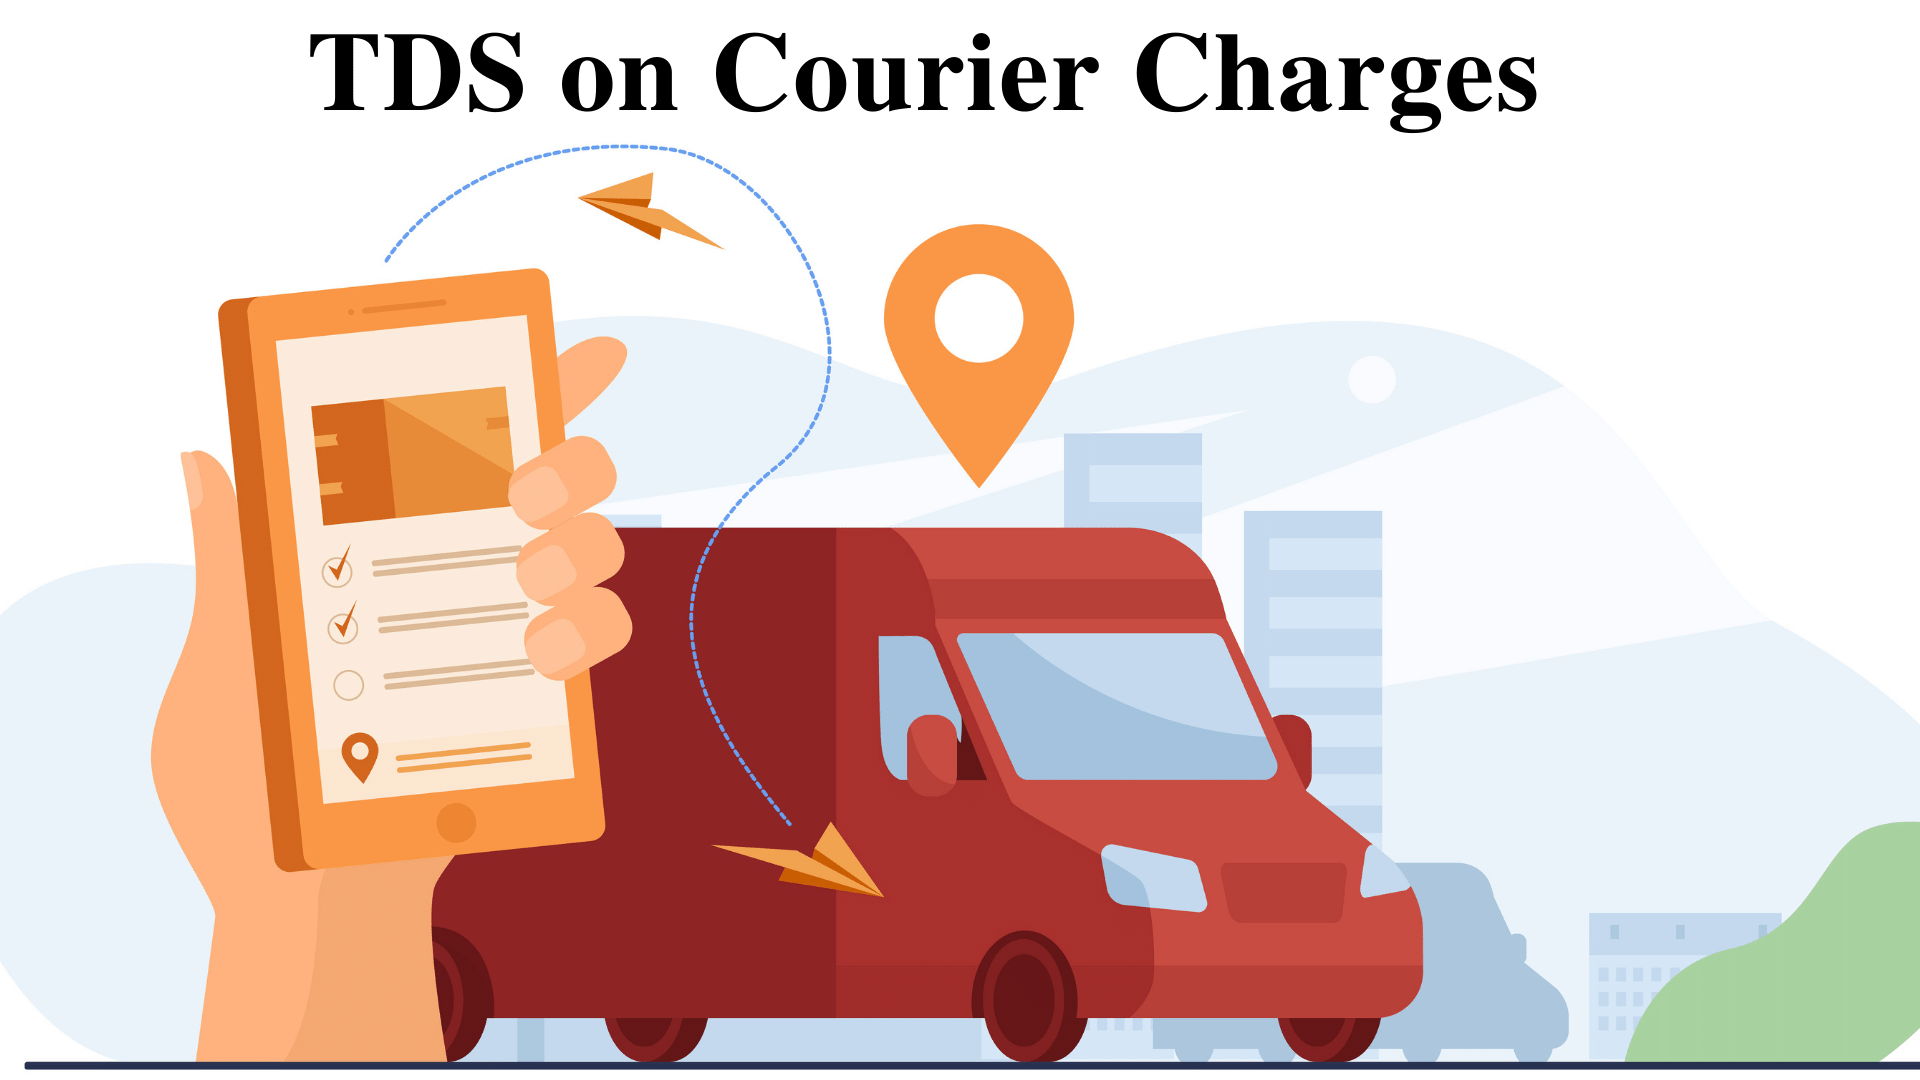 TDS on courier charges - Section 194C of Income Tax Act